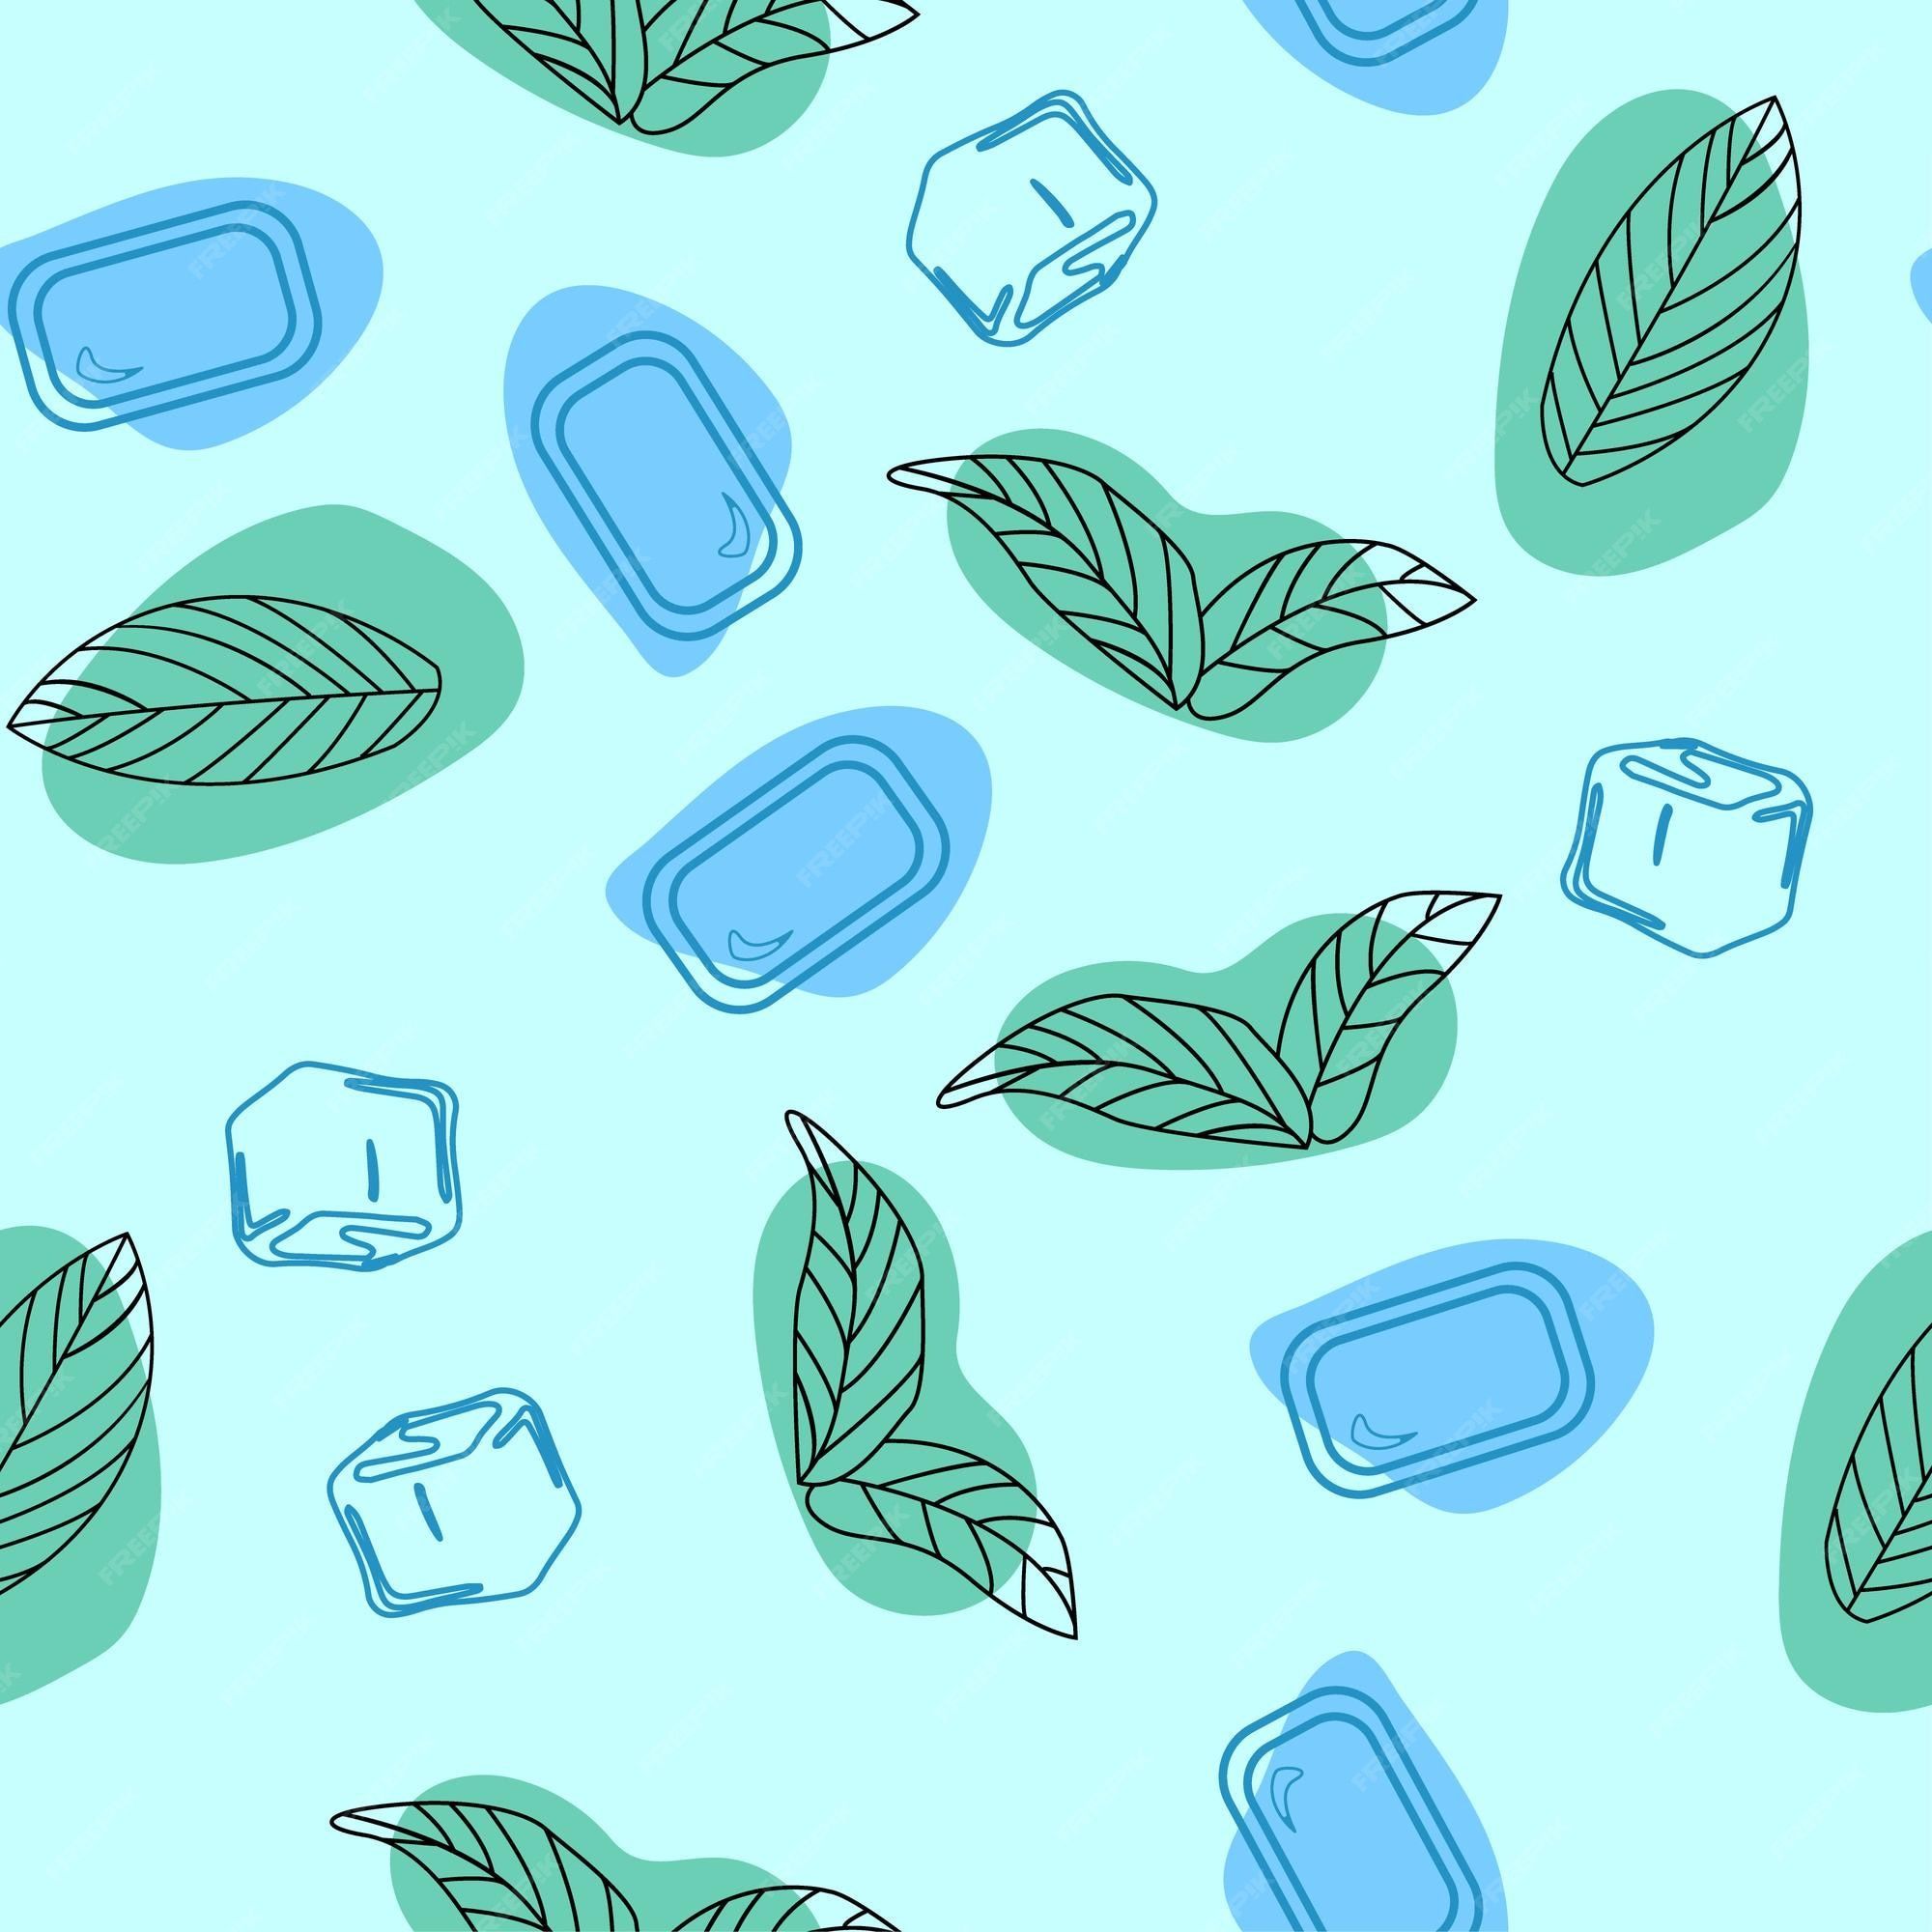 A pattern of ice cubes, leaves, and rectangular shapes on a blue background - Mint green